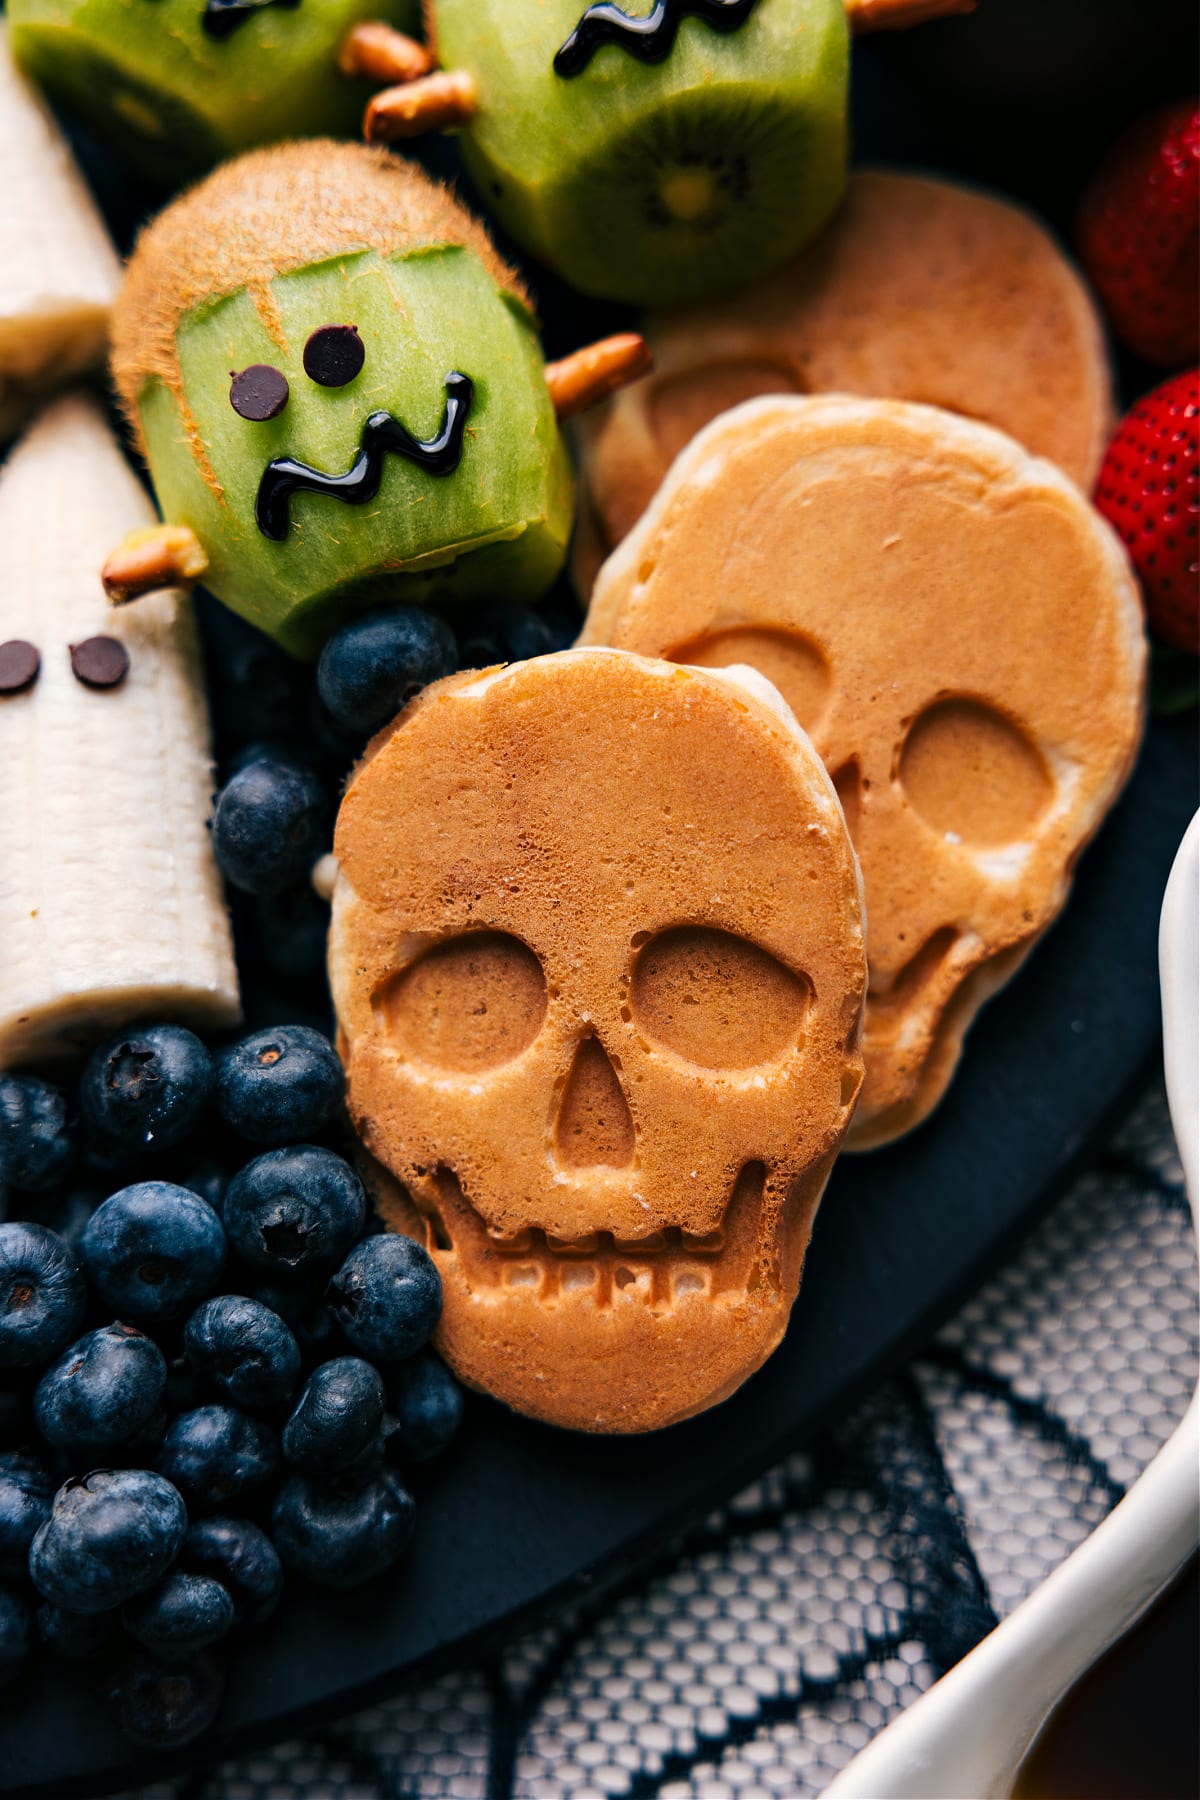 Pancakes shaped like skulls, cooked and ready to eat.